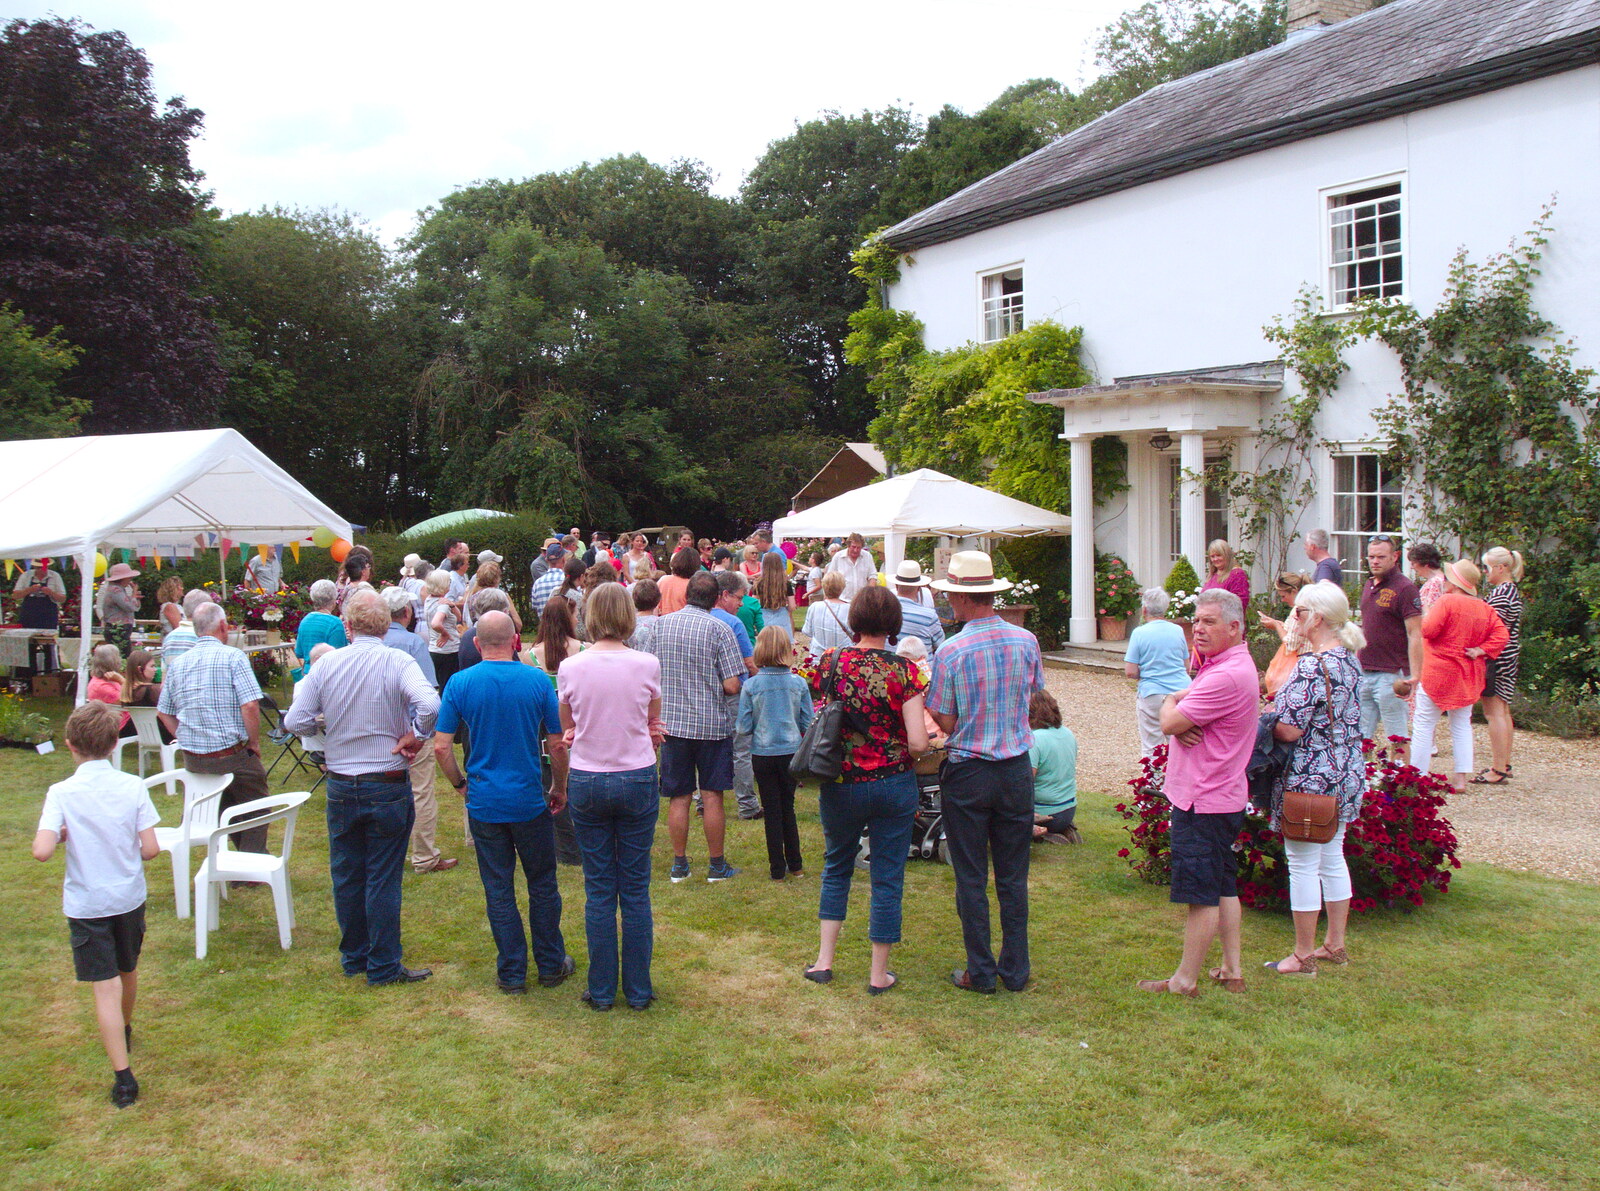 The crowds listen out for the raffle draw from GSB at the Summer Fete, Market Weston, Suffolk - 20th July 2019